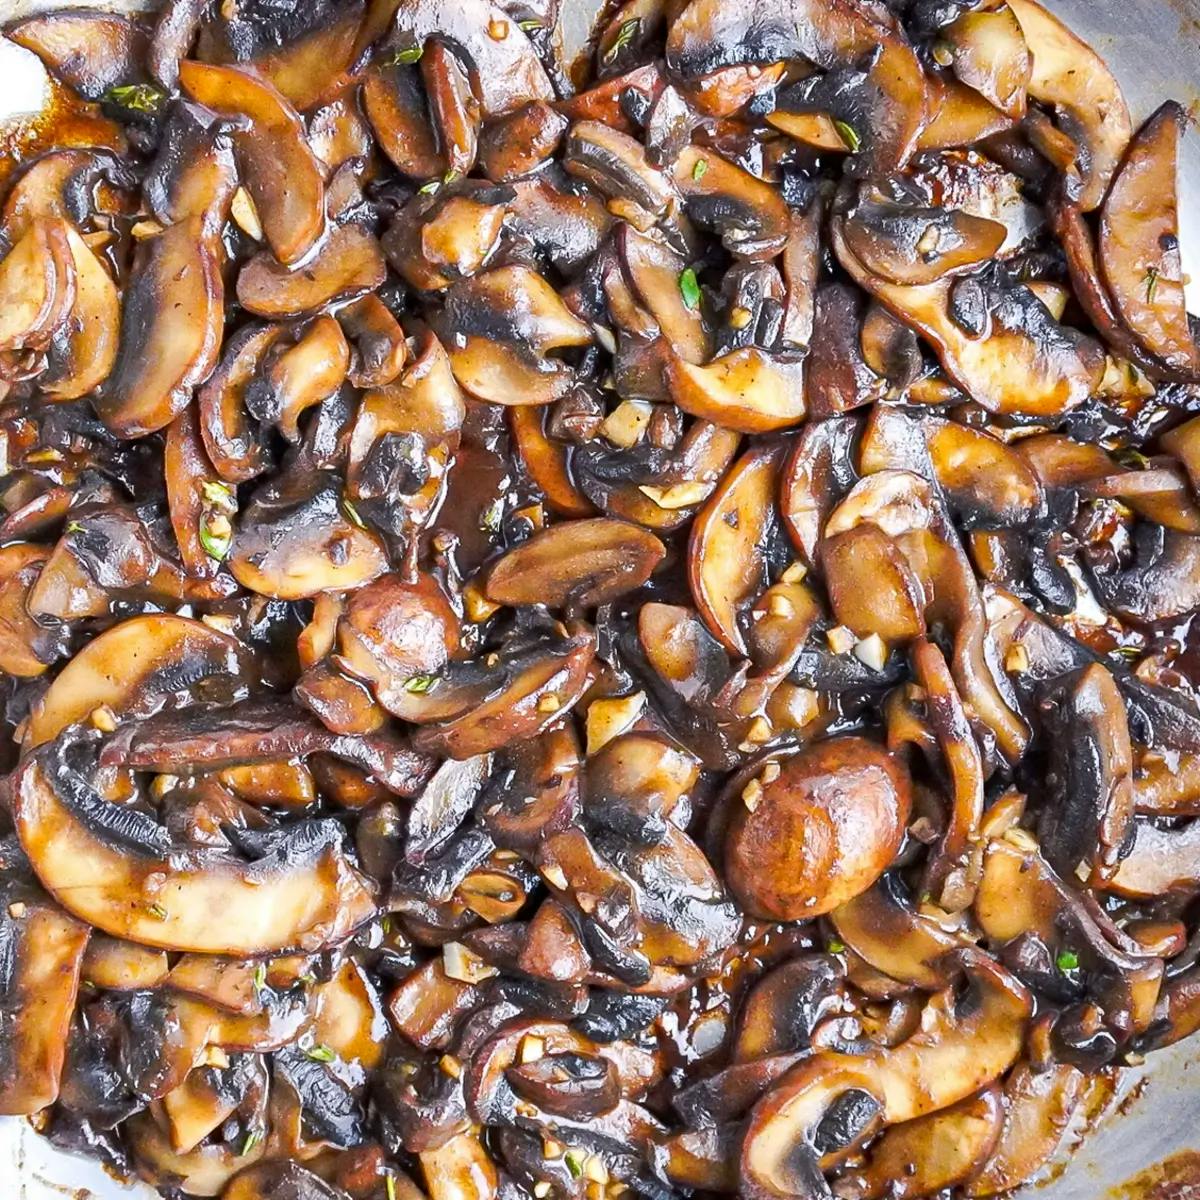 Mushrooms sautéed in butter to make a vegan holiday appetizer.